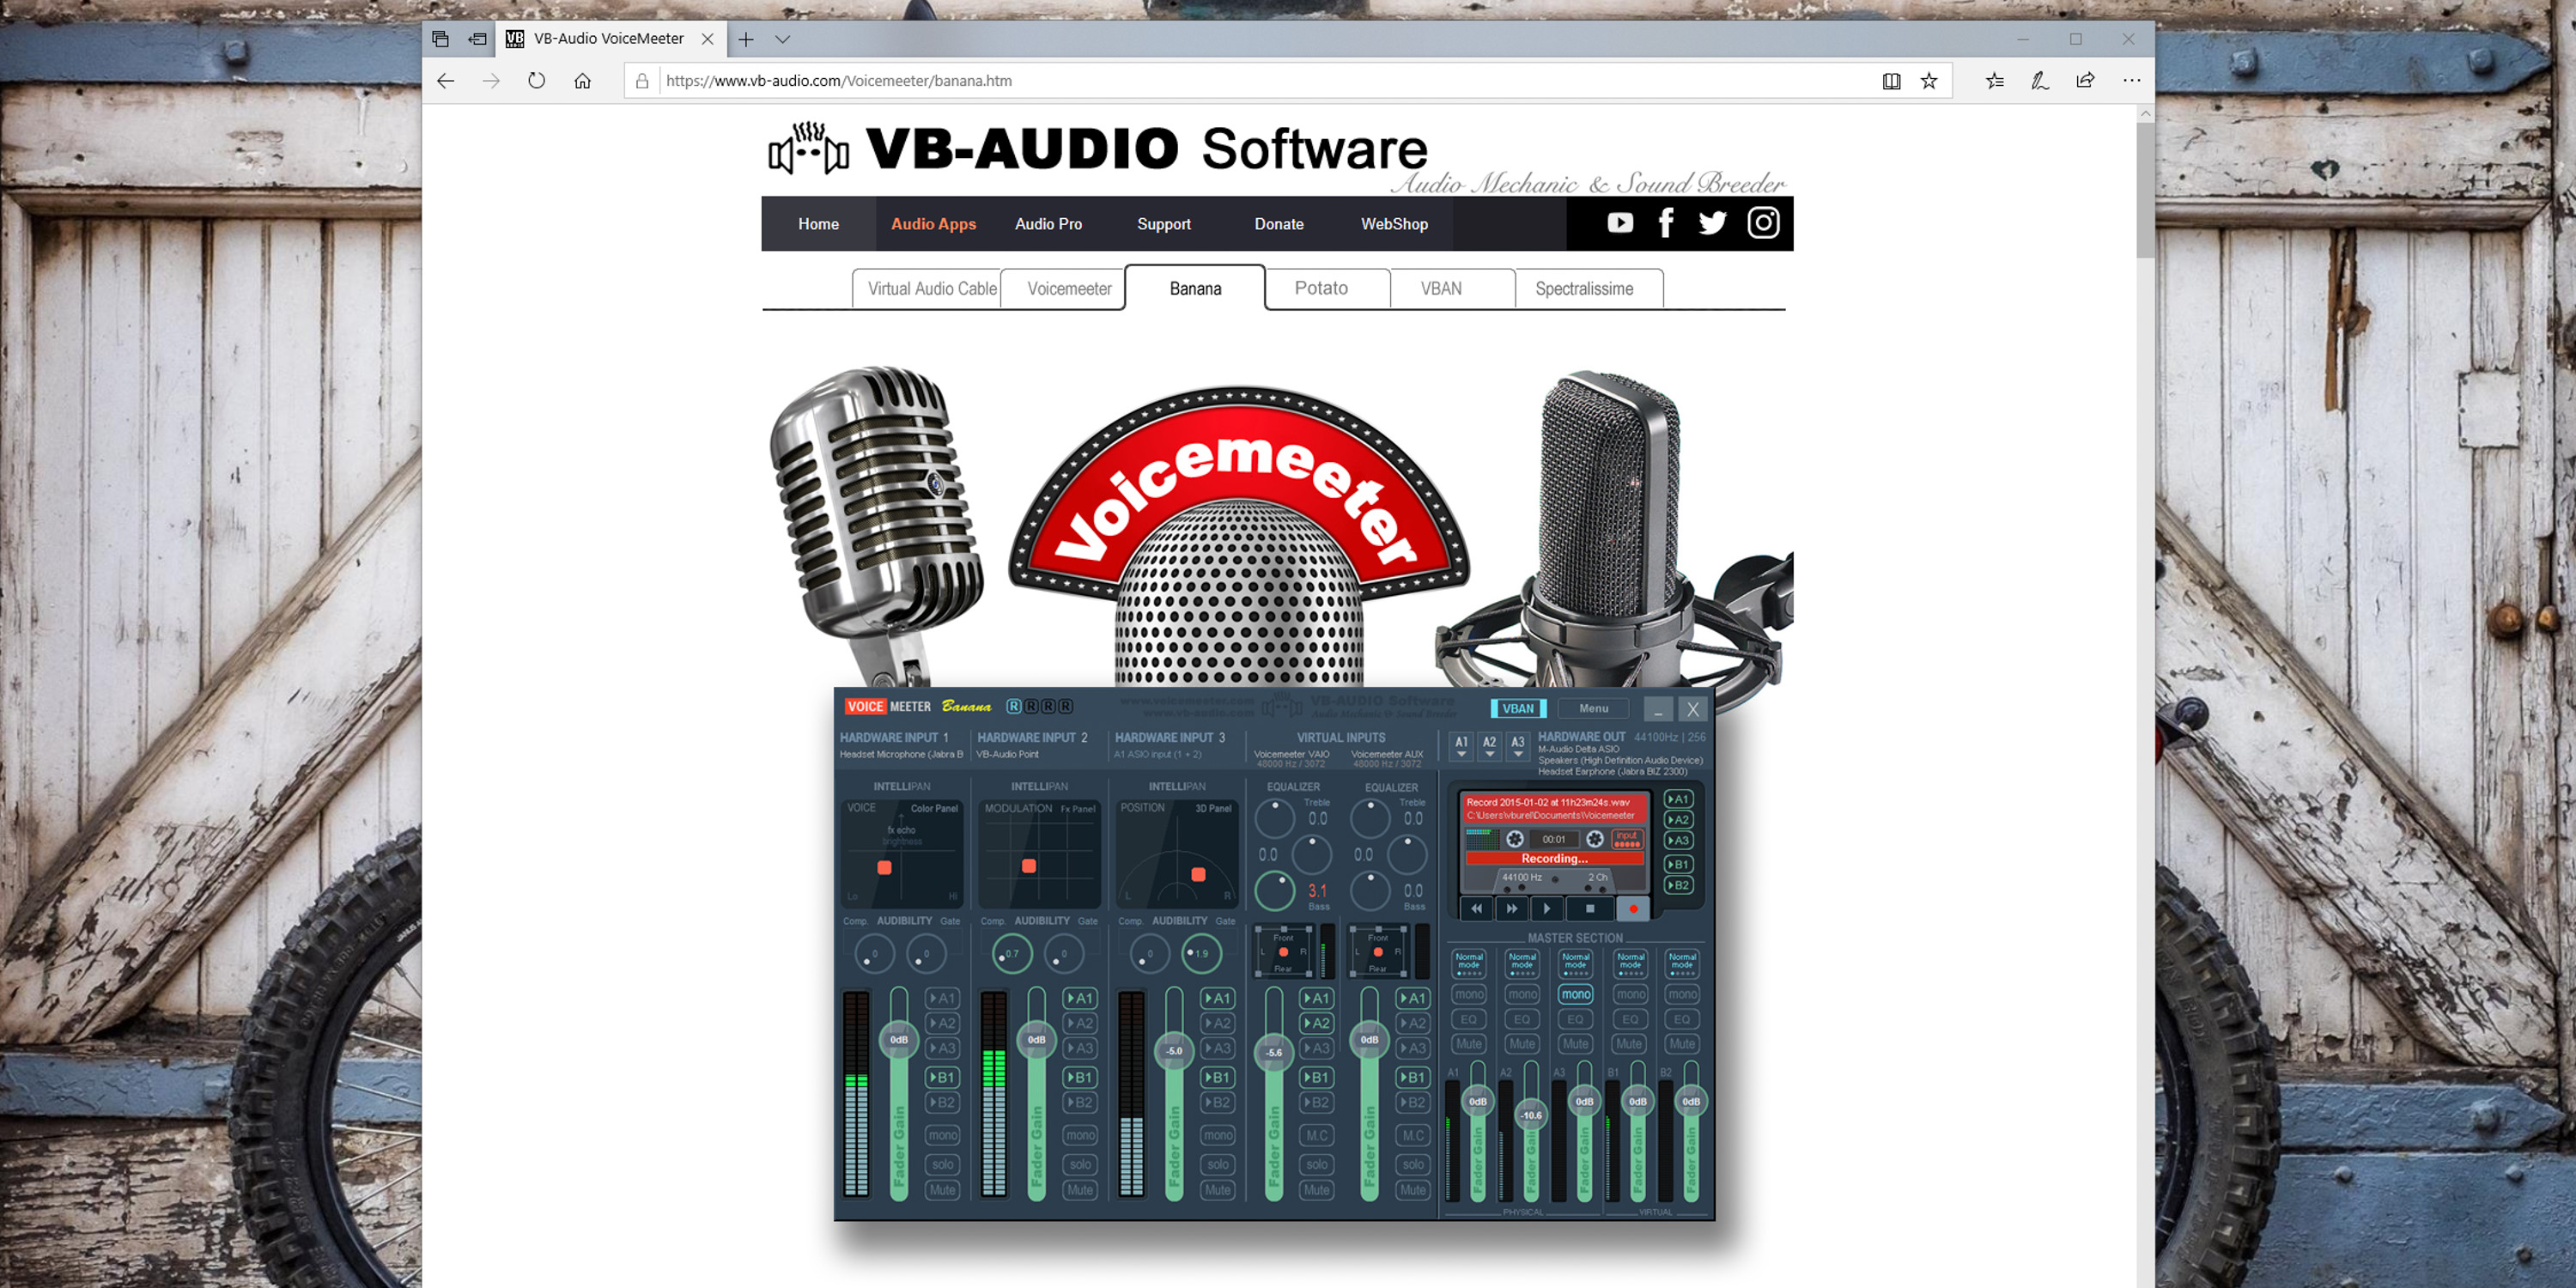 how to use virtual audio cable to podcast